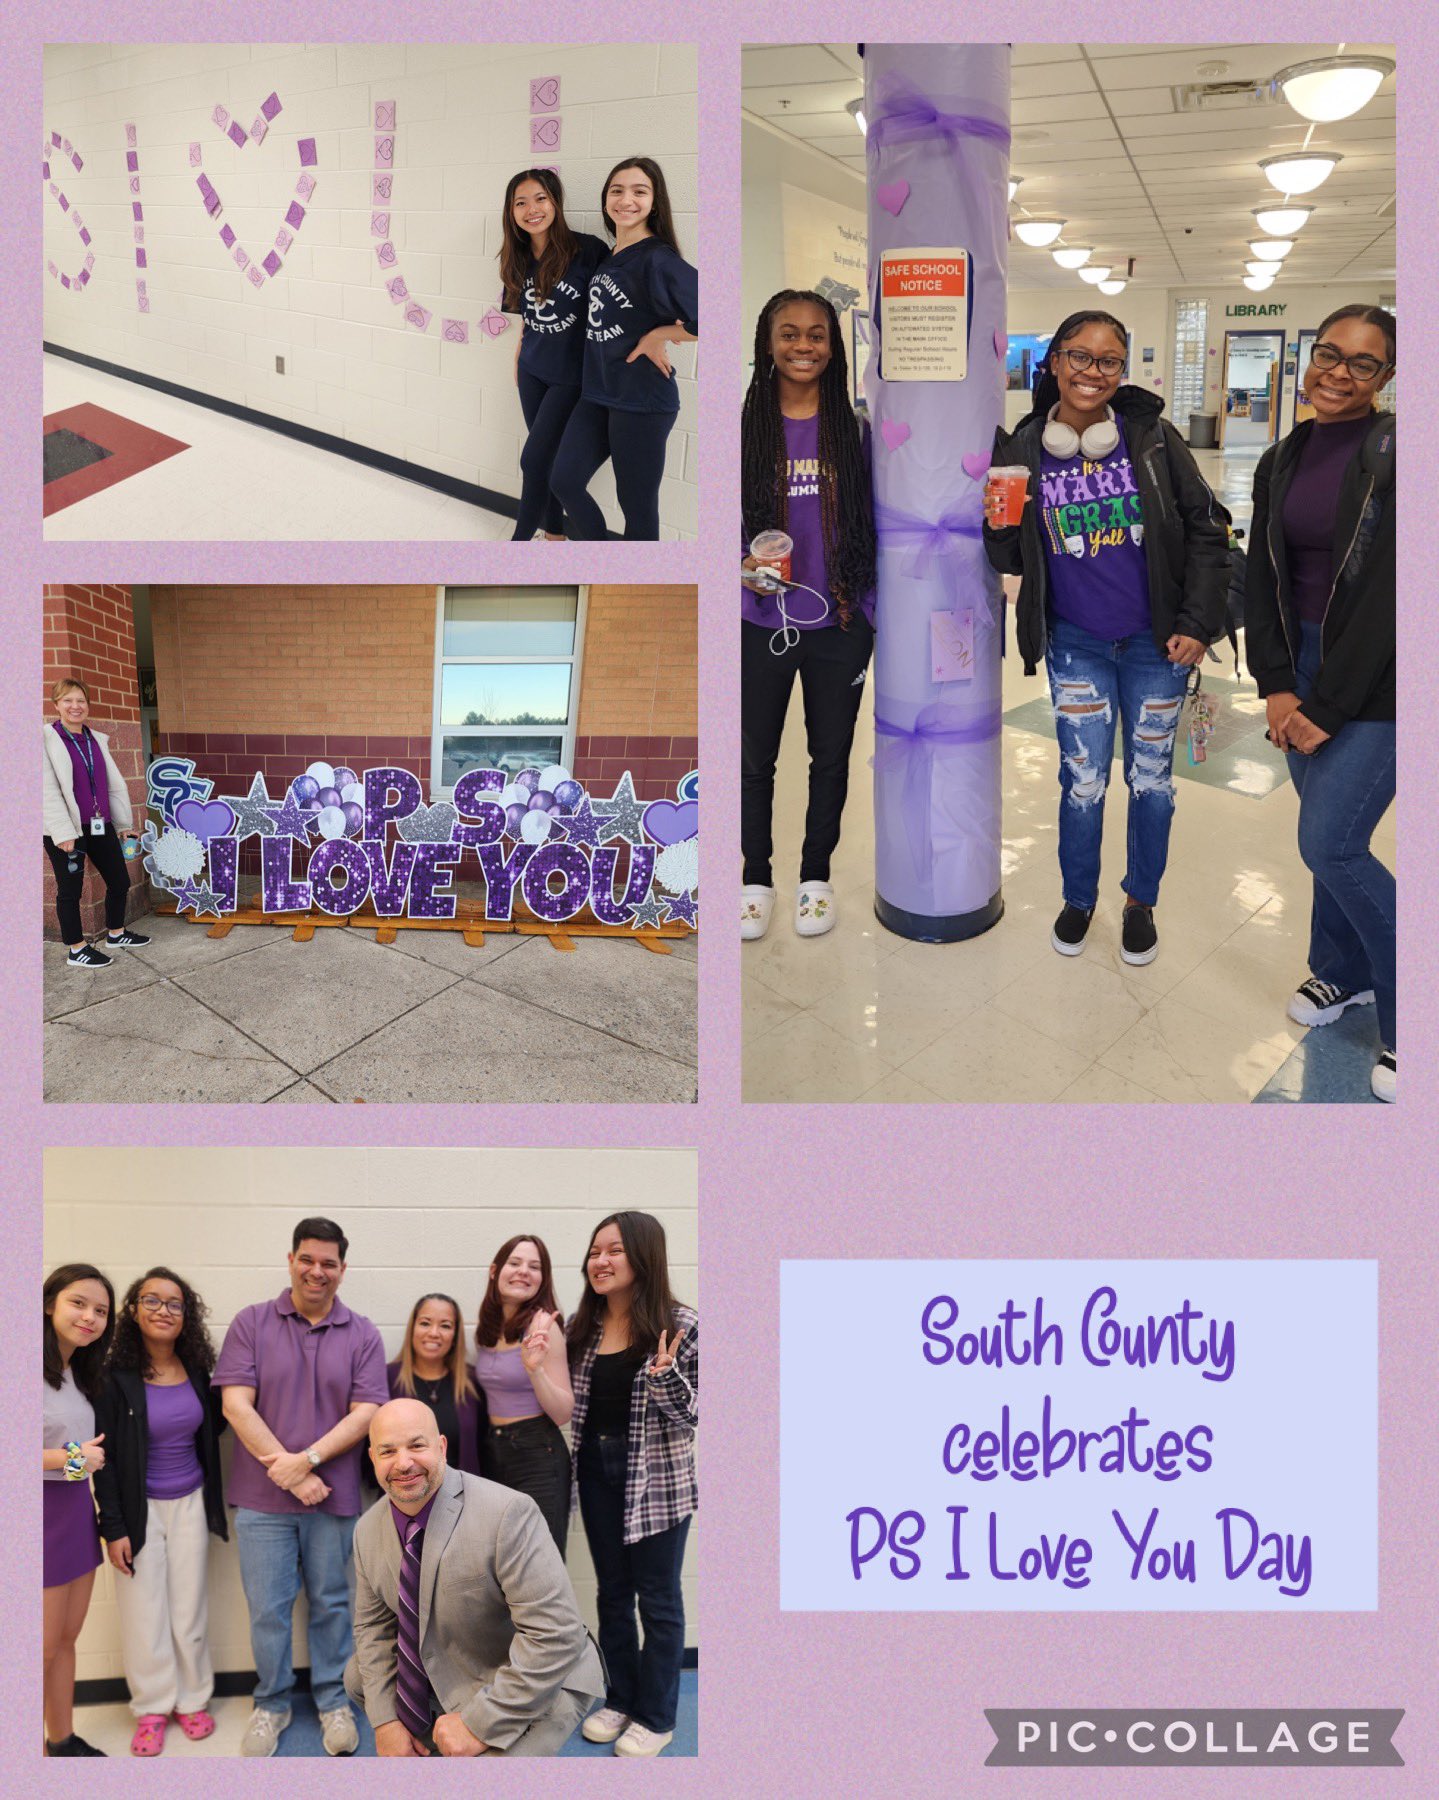 Photo collage of students wearing purple  and decorations at SCHS in honor of "P.S. I Love You Day."